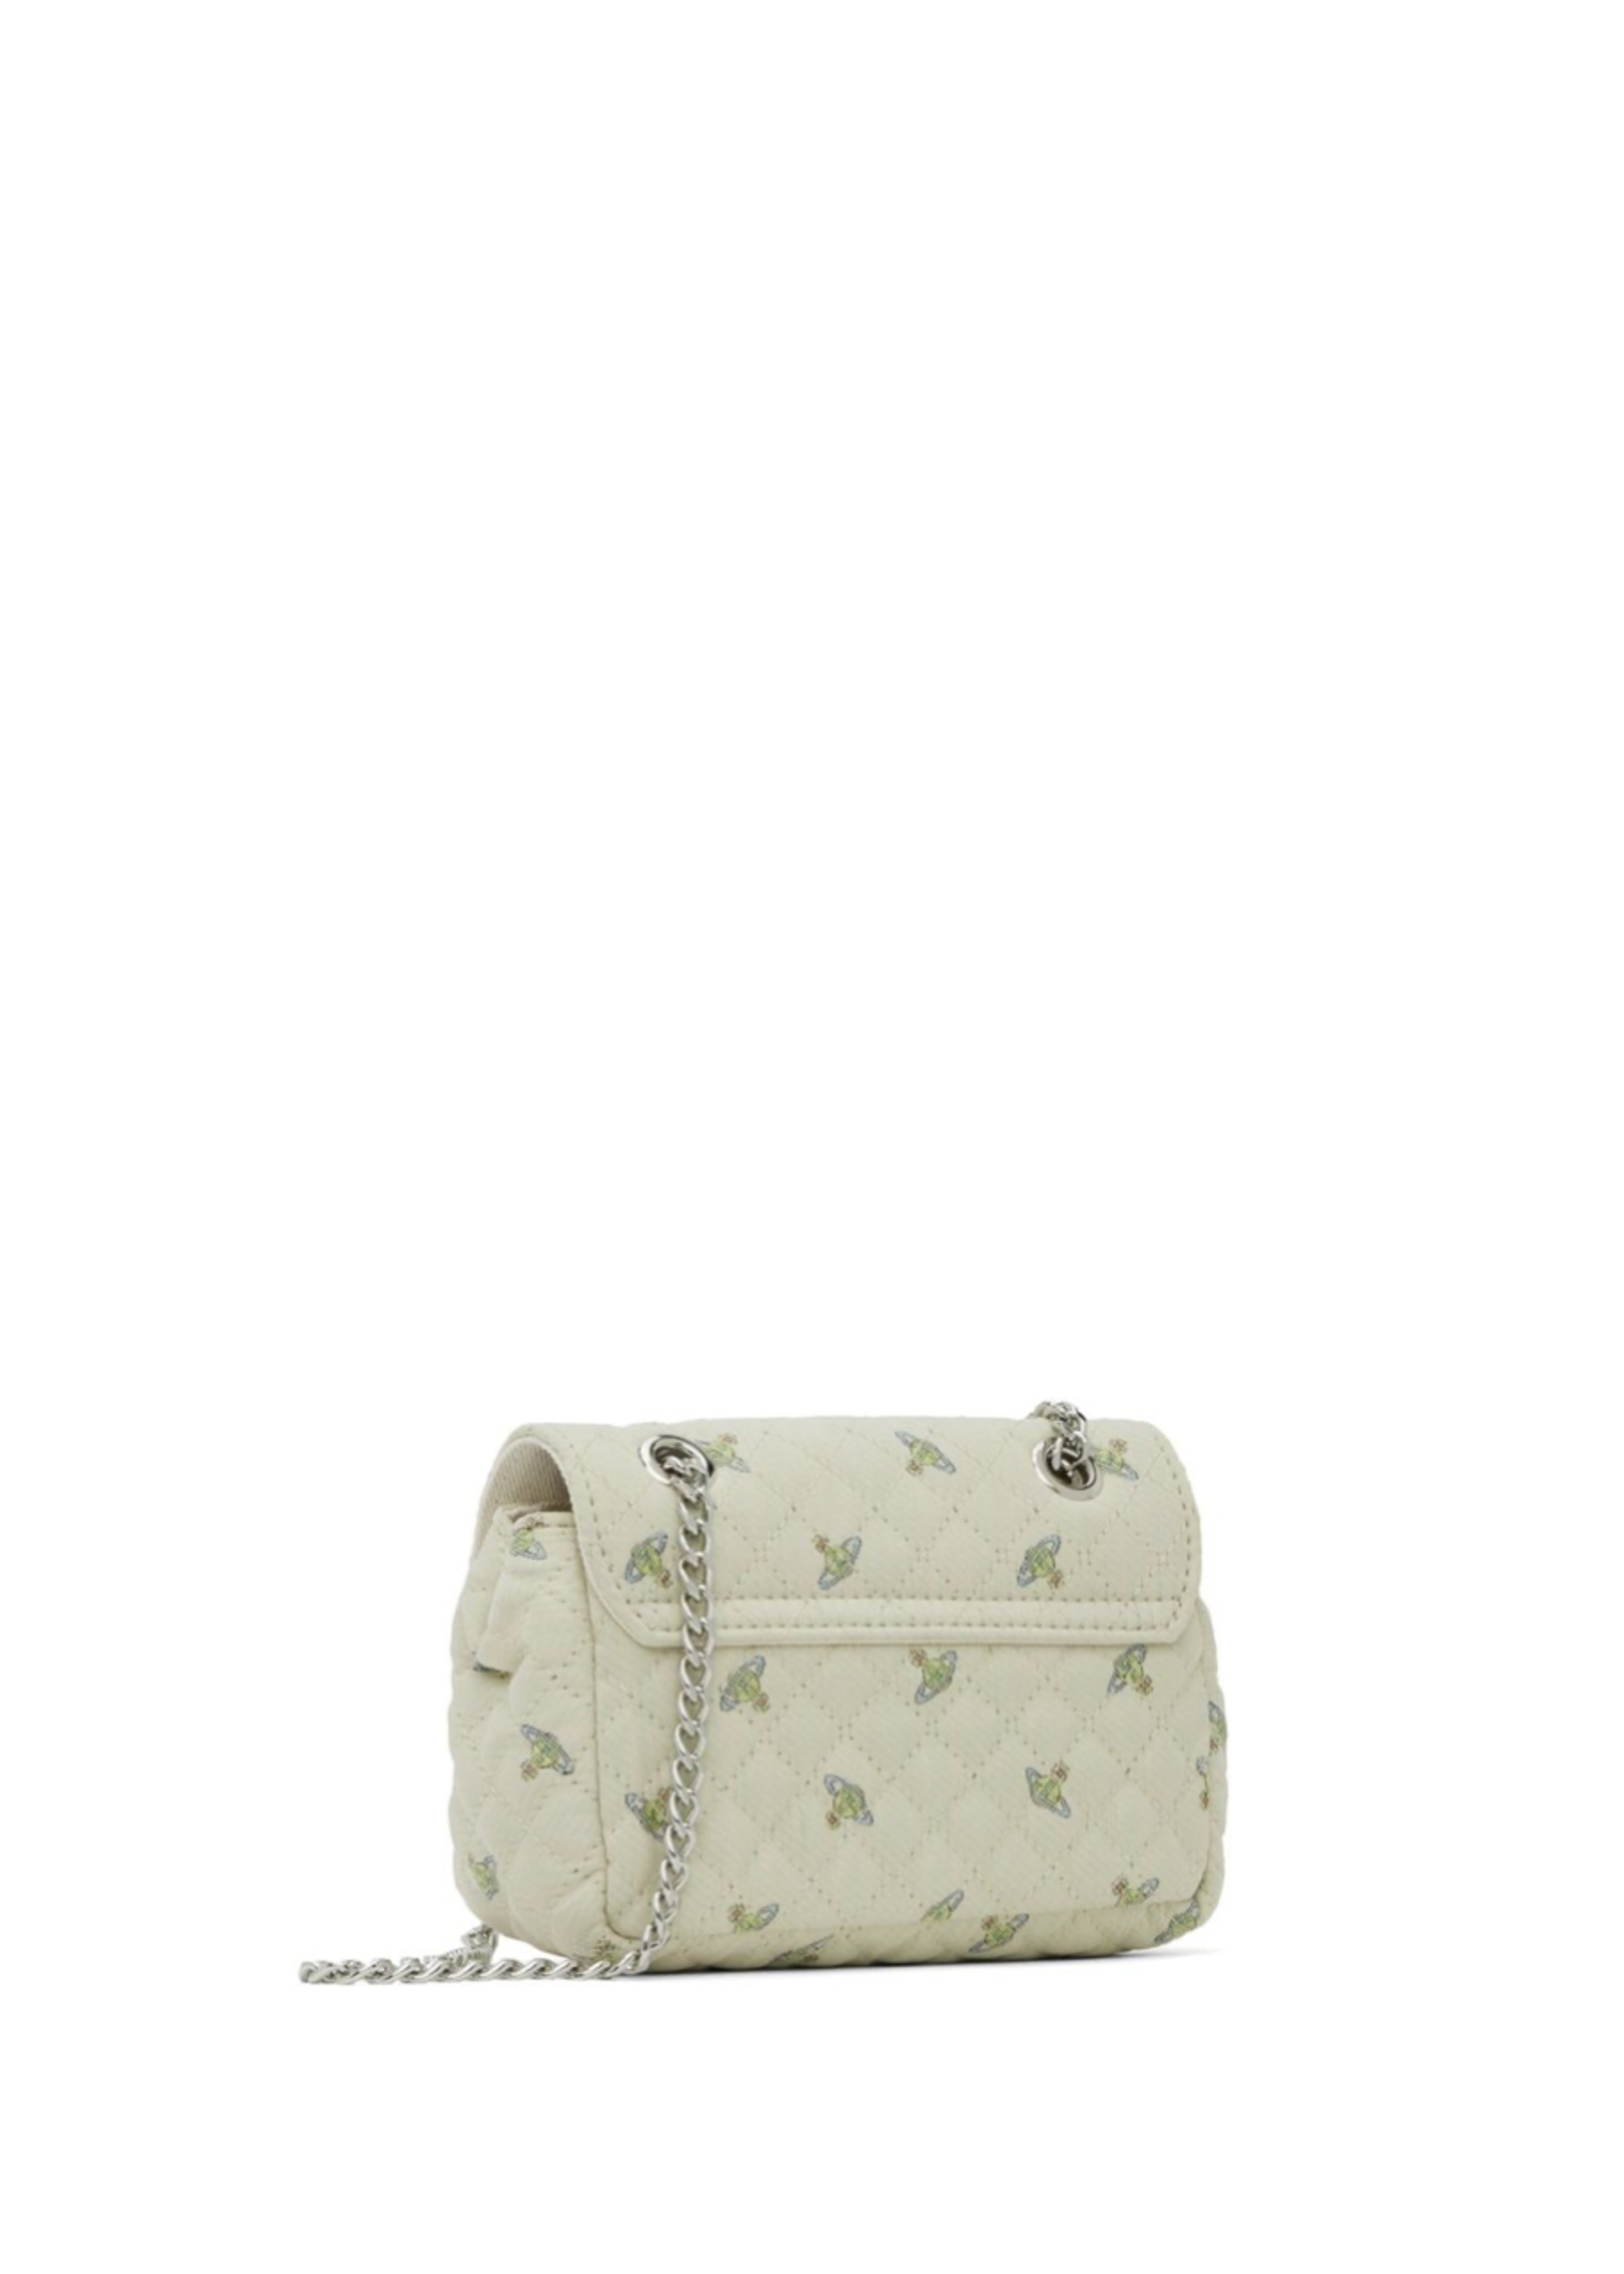 VIVIENNE WESTWOOD Quilted Beige Satin Mini Purse with Orbs and chain strap